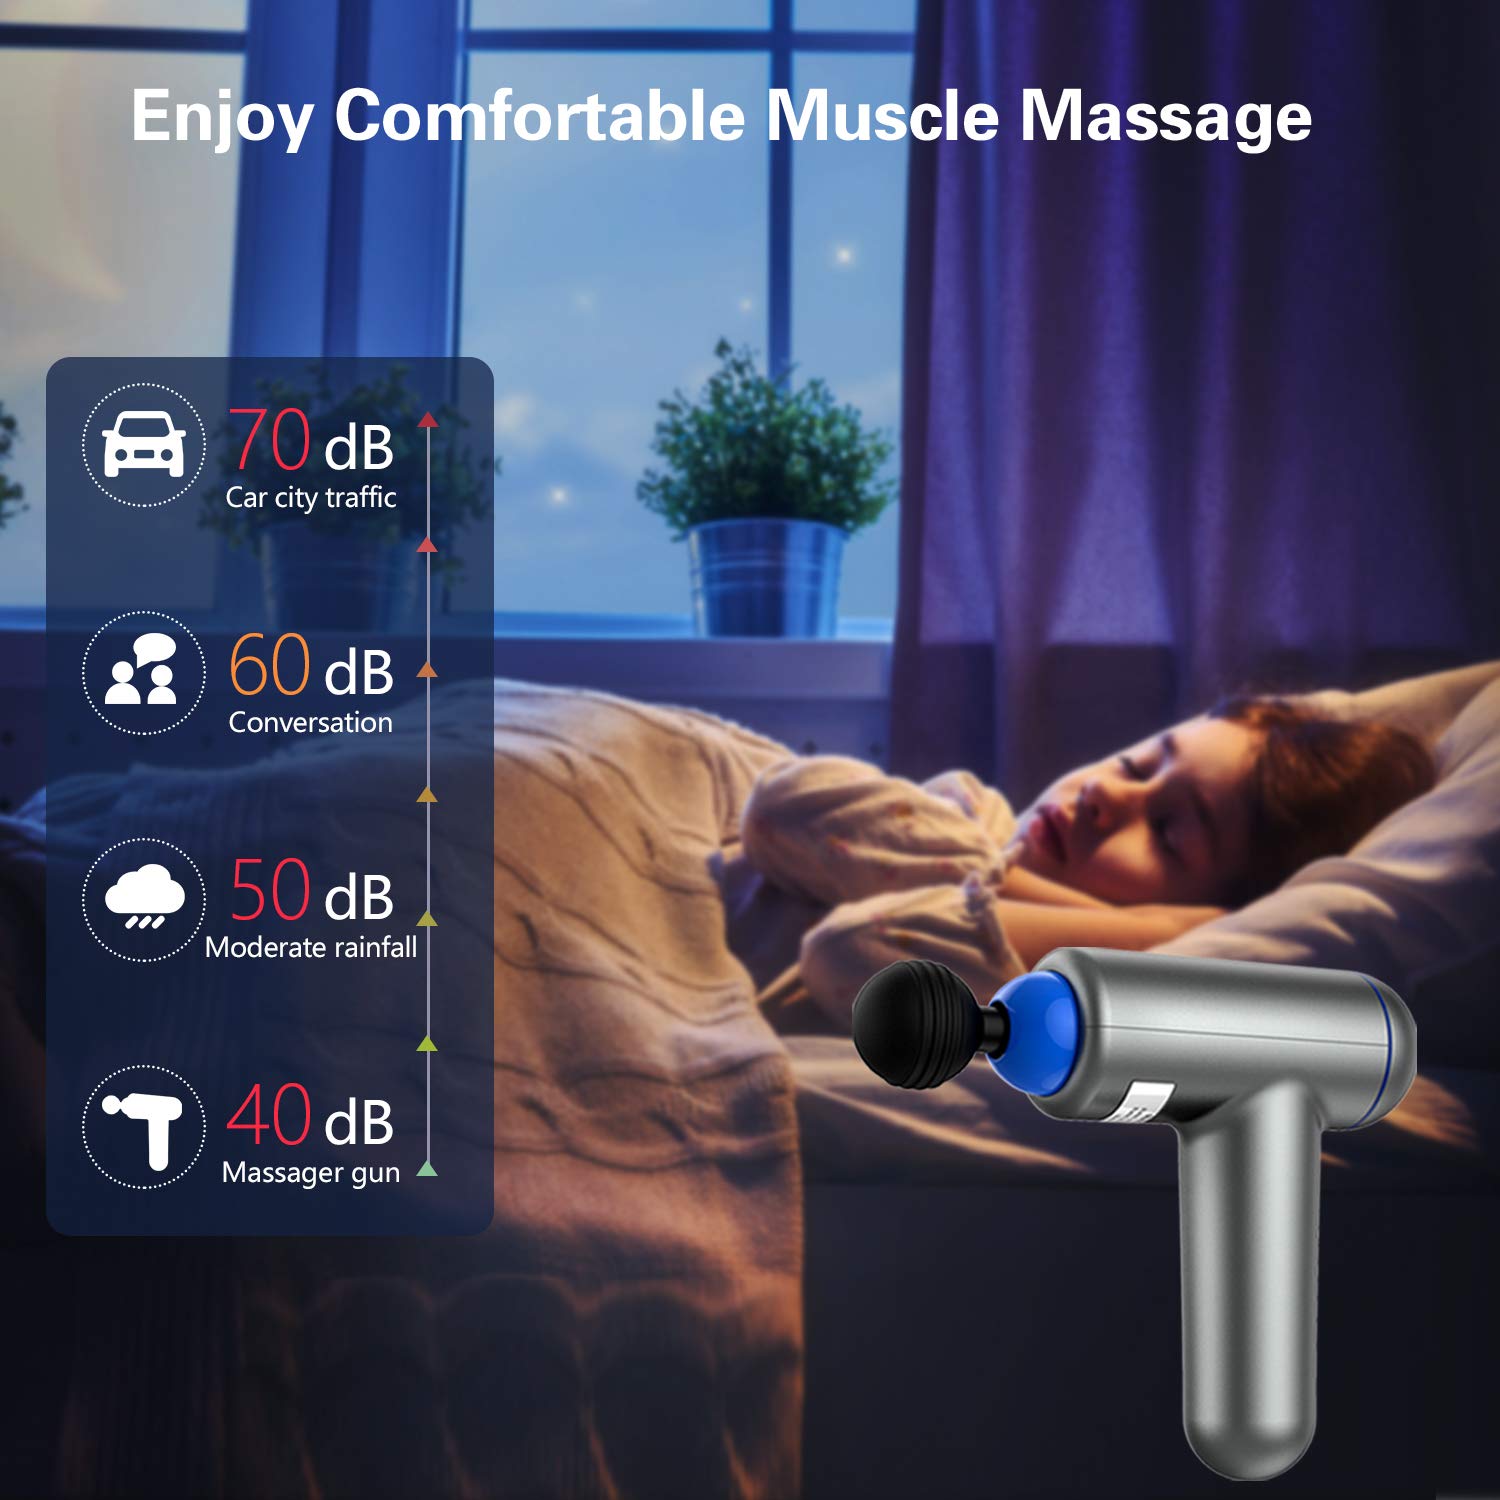 SENWEN Deep Tissue Muscle Massage Gun USB Rechargeable Super Quiet Percussion Massage Gun Body Massage with 4 Massage Heads and 2 USB Charging Cables, Grey